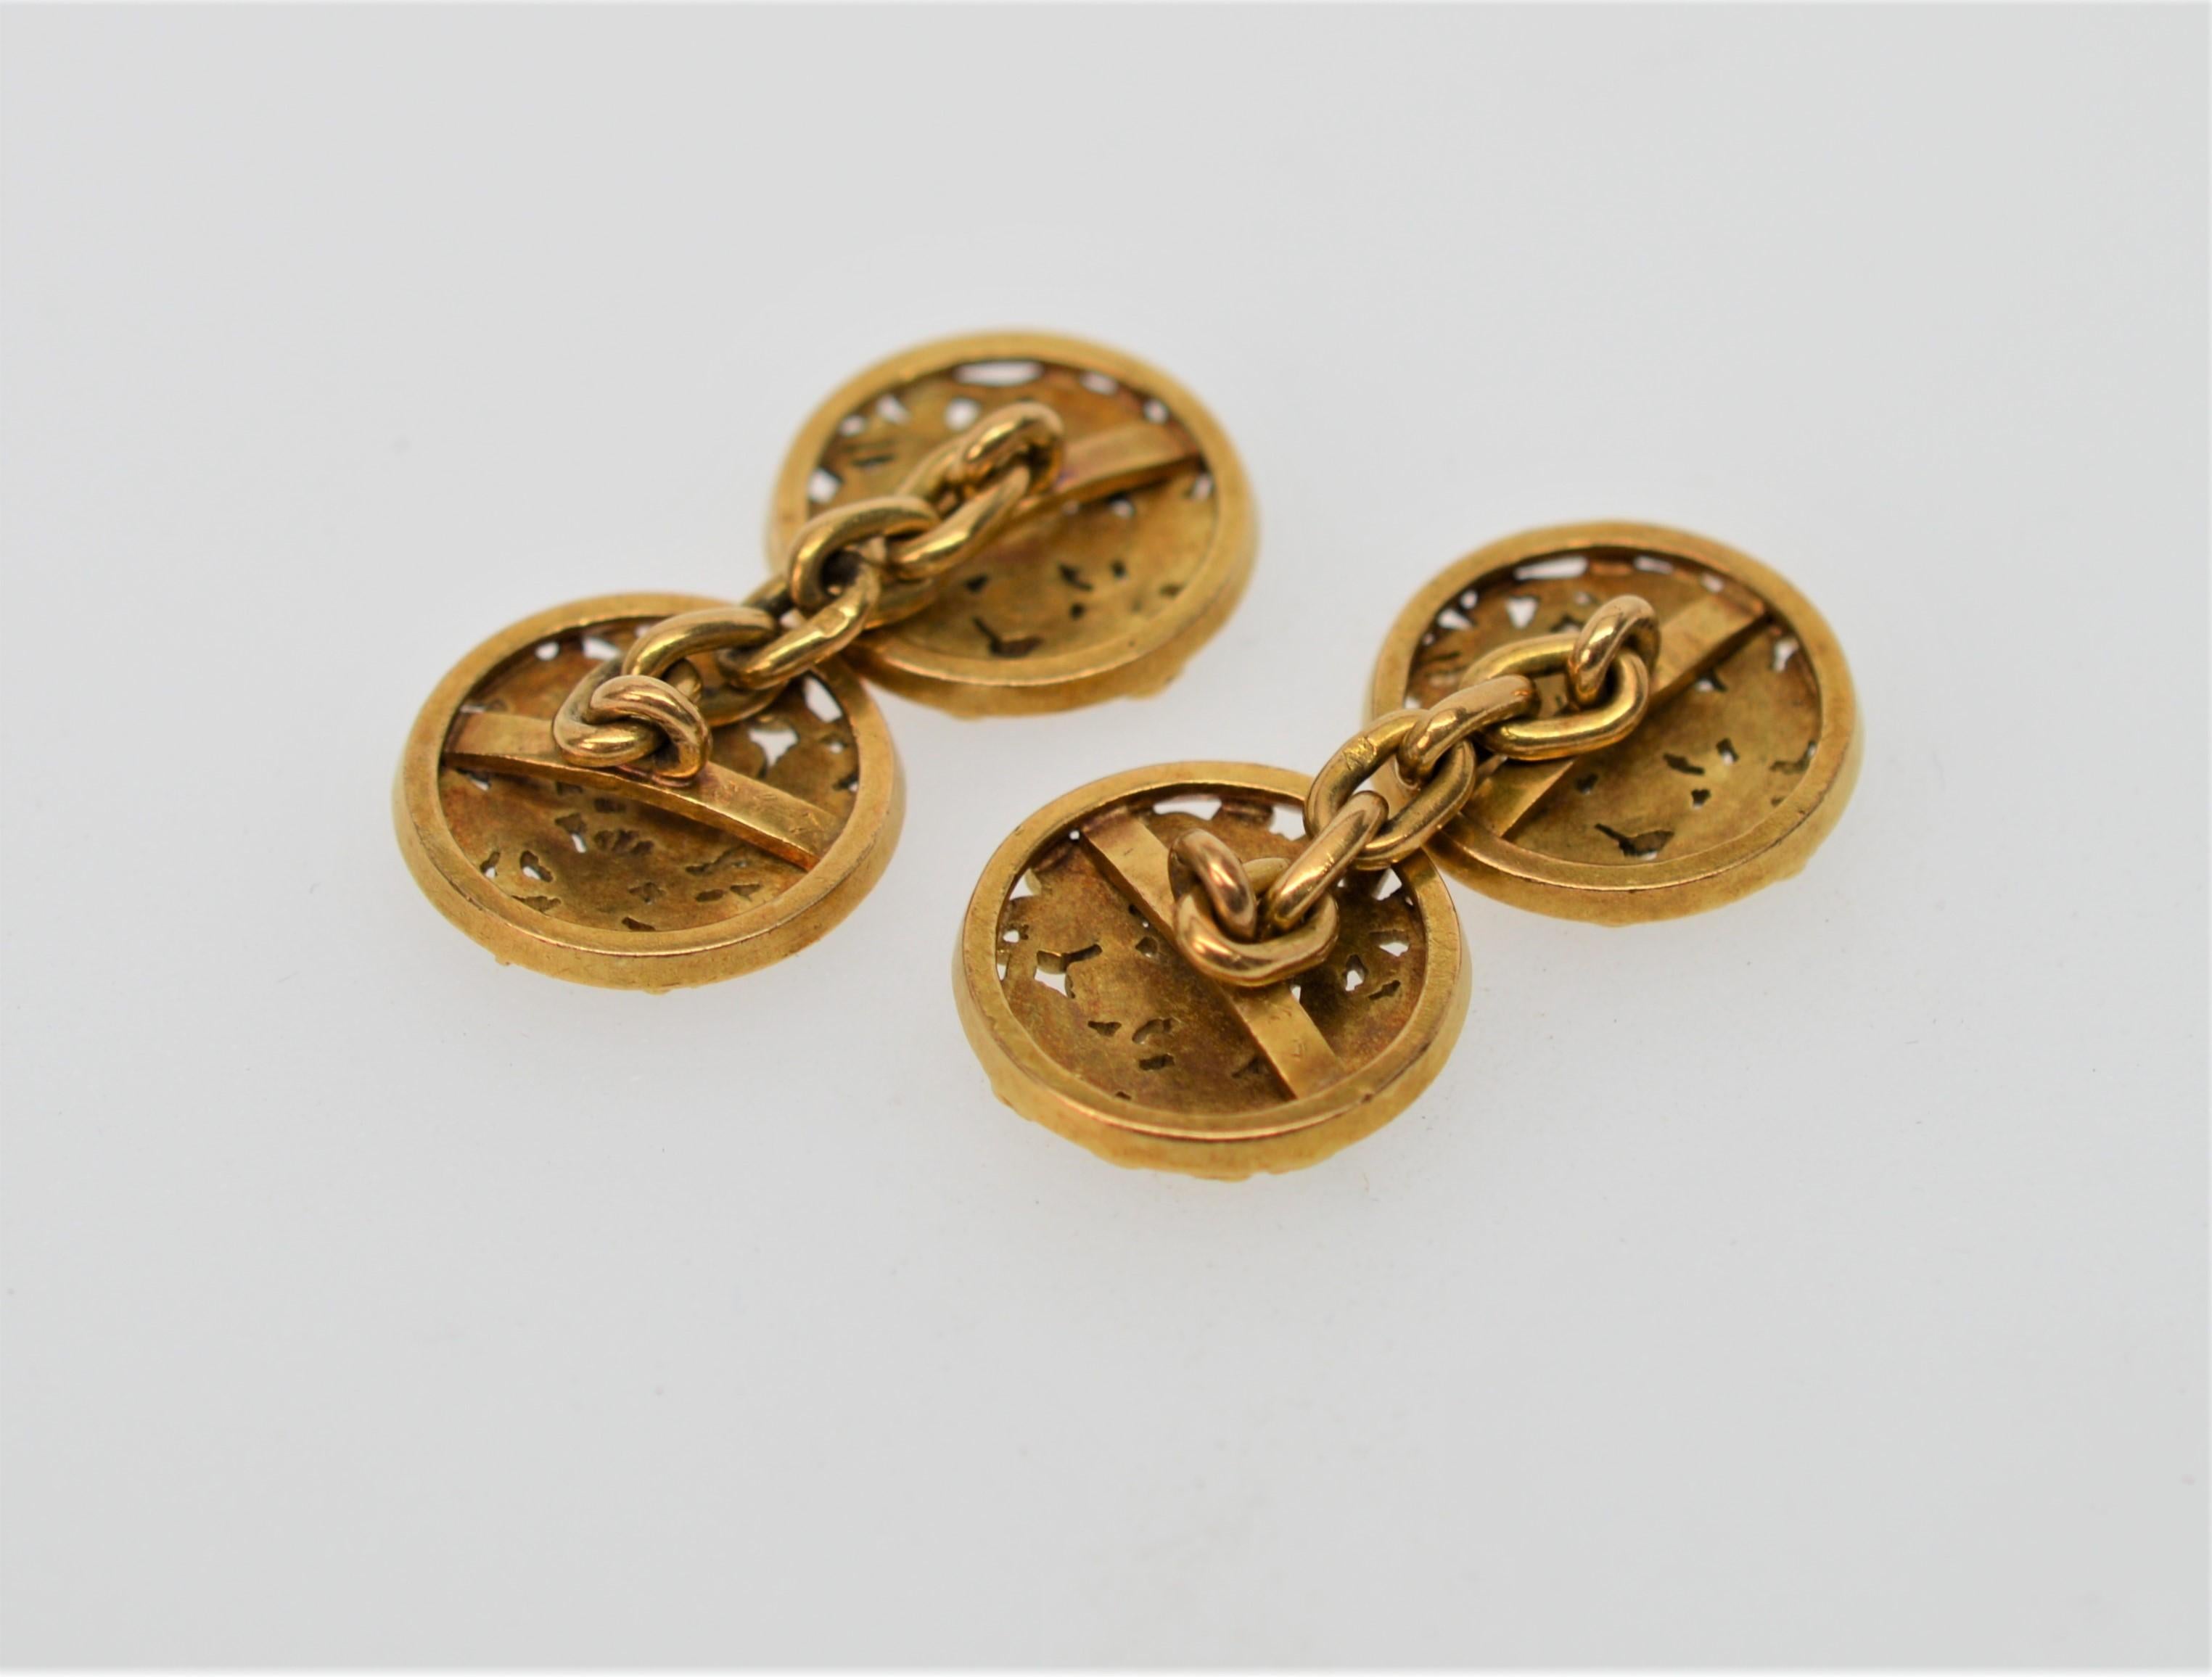 Antique English or Continental 18K Yellow Gold Cuff Links (pair) decorated with hand-applied Clover Leaves. Measuring  15mm Round, these Cuff Links are joined by a 3/4 inch 18K Yellow Gold Chain. Total weight 8.8 pennyweight 18K Gold. In Gift Box.